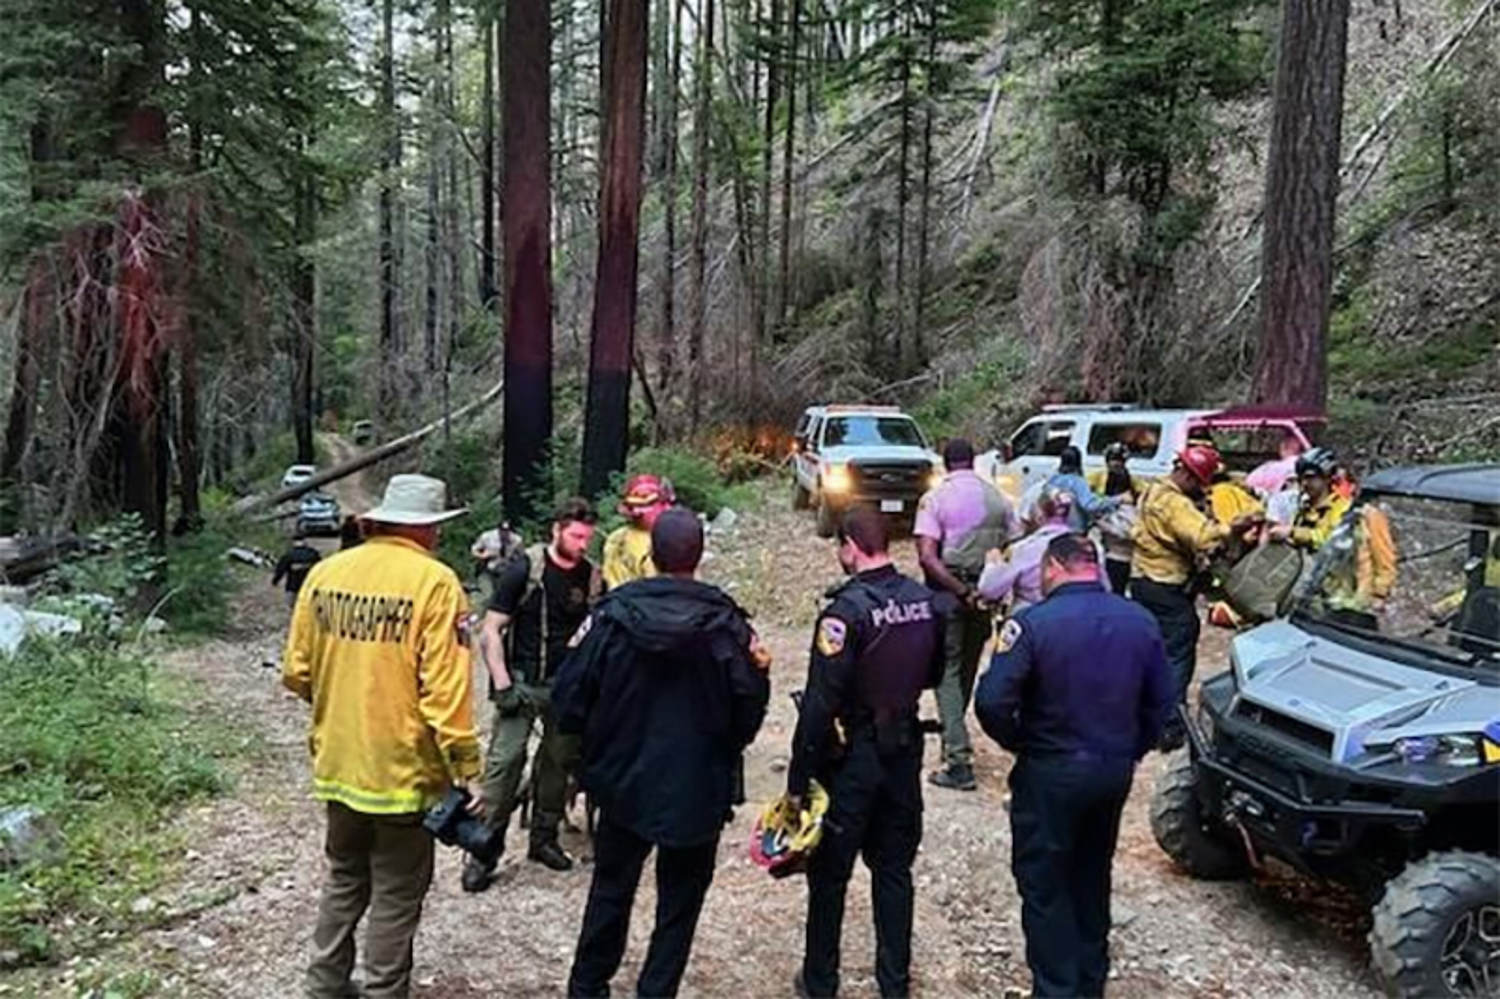 Missing man found alive in California wooded area after 9 days